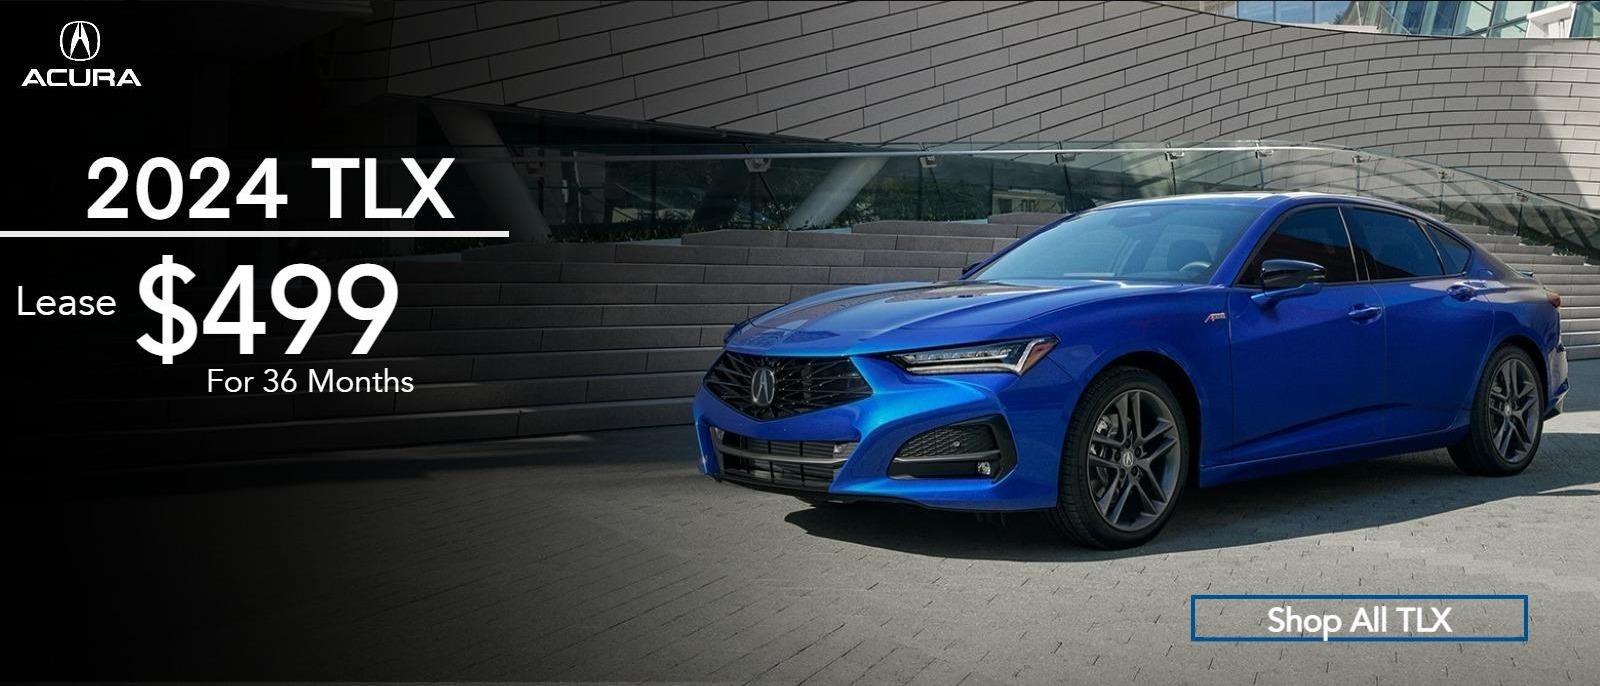 Acura TLX Parked outdoor 

Lease $499* Per month for 36 months. $5,299 Total due at signing.

*Closed-end lease for 2024 TLX TECH 10 Speed Automatic vehicles (UB5F4RGNW) available from May 1, 2024 through July 1, 2024, available to well-qualified lessees approved by Acura Financial Services. Not all lessees will qualify. Higher lease rates apply for lessees with lower credit ratings. Lease offers vary based on MSRP. MSRP $46,195.00 (includes destination; excludes taxes, titles, license and documentary service fees). Actual net capitalized cost $40,705.58. Net capitalized cost includes $595 acquisition fee. Dealer contribution may vary and could affect actual lease payment. Total monthly payments $17,964.00. Option to purchase at lease end $25,407.25.
Must take new retail delivery of vehicle from dealer stock by July 1, 2024. Lessee responsible for maintenance, excessive wear/tear and 15¢/mile over 10,000 miles/year for vehicles with MSRP less than $30,000, and 20¢/mile over 10,000 miles/year for vehicles with MSRP of $30,000 or more. See your Acura dealer for complete details.